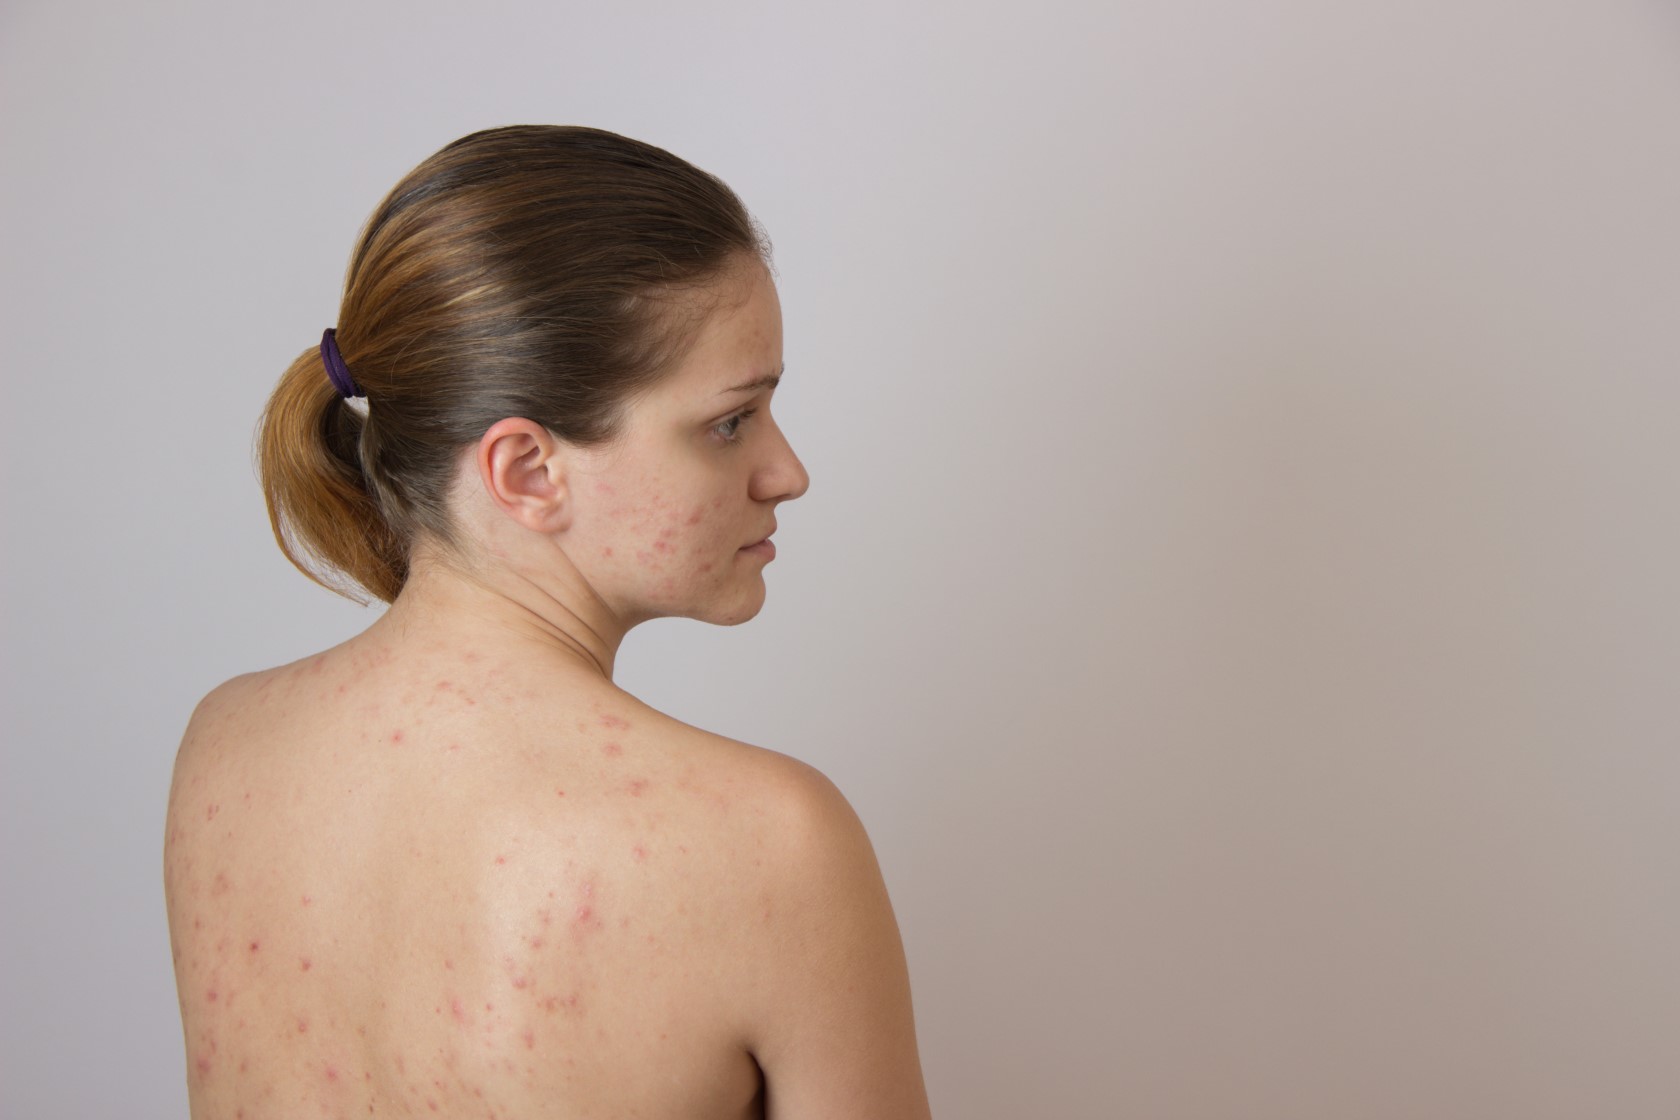 Treatments for hormonal acne.